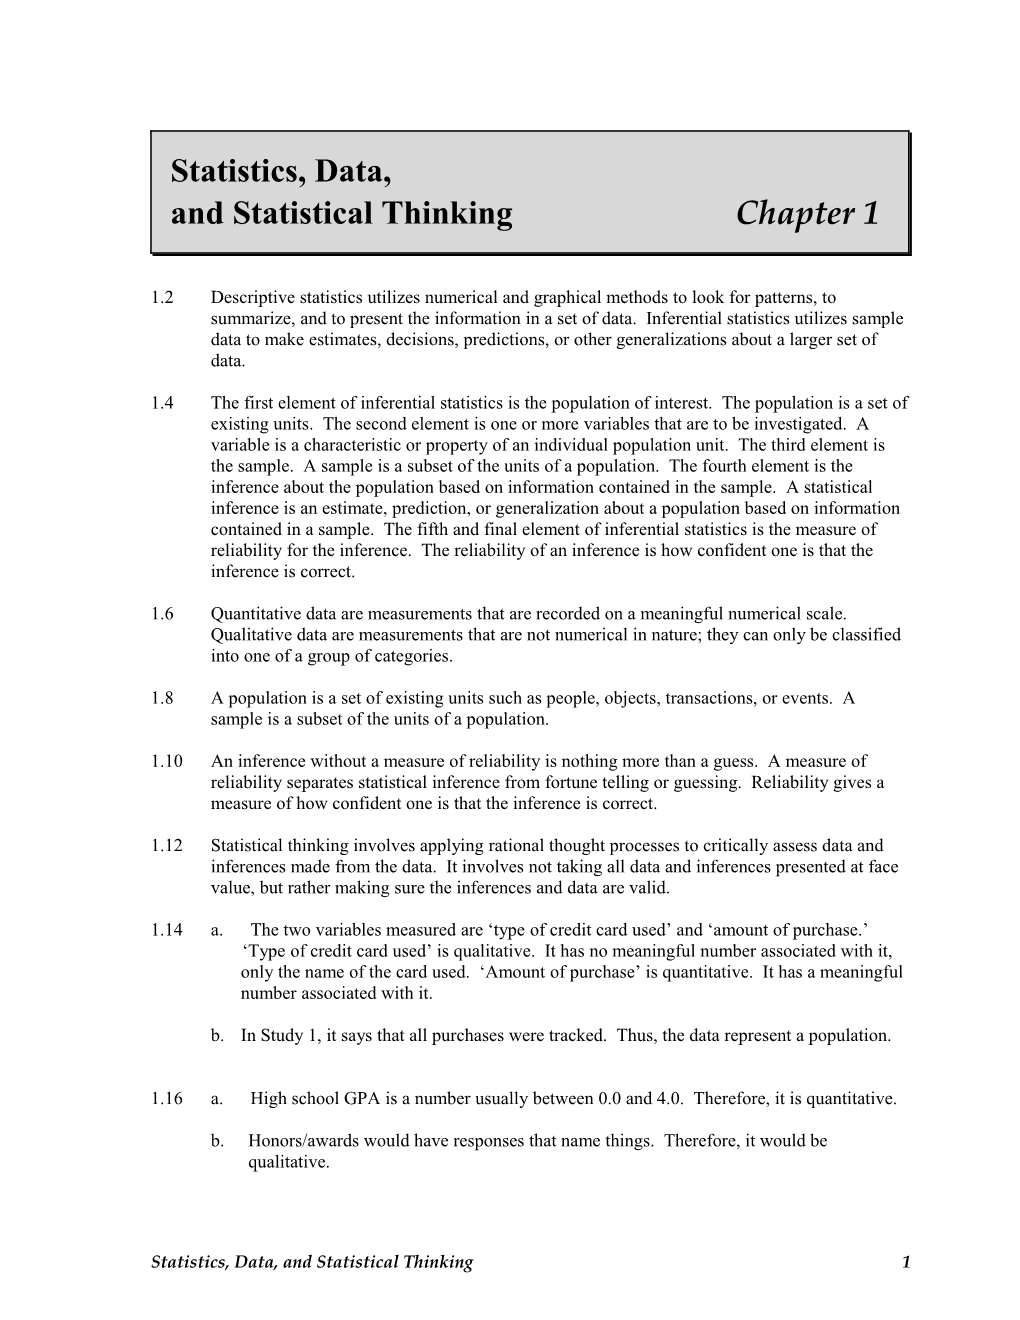 And Statistical Thinking Chapter 1